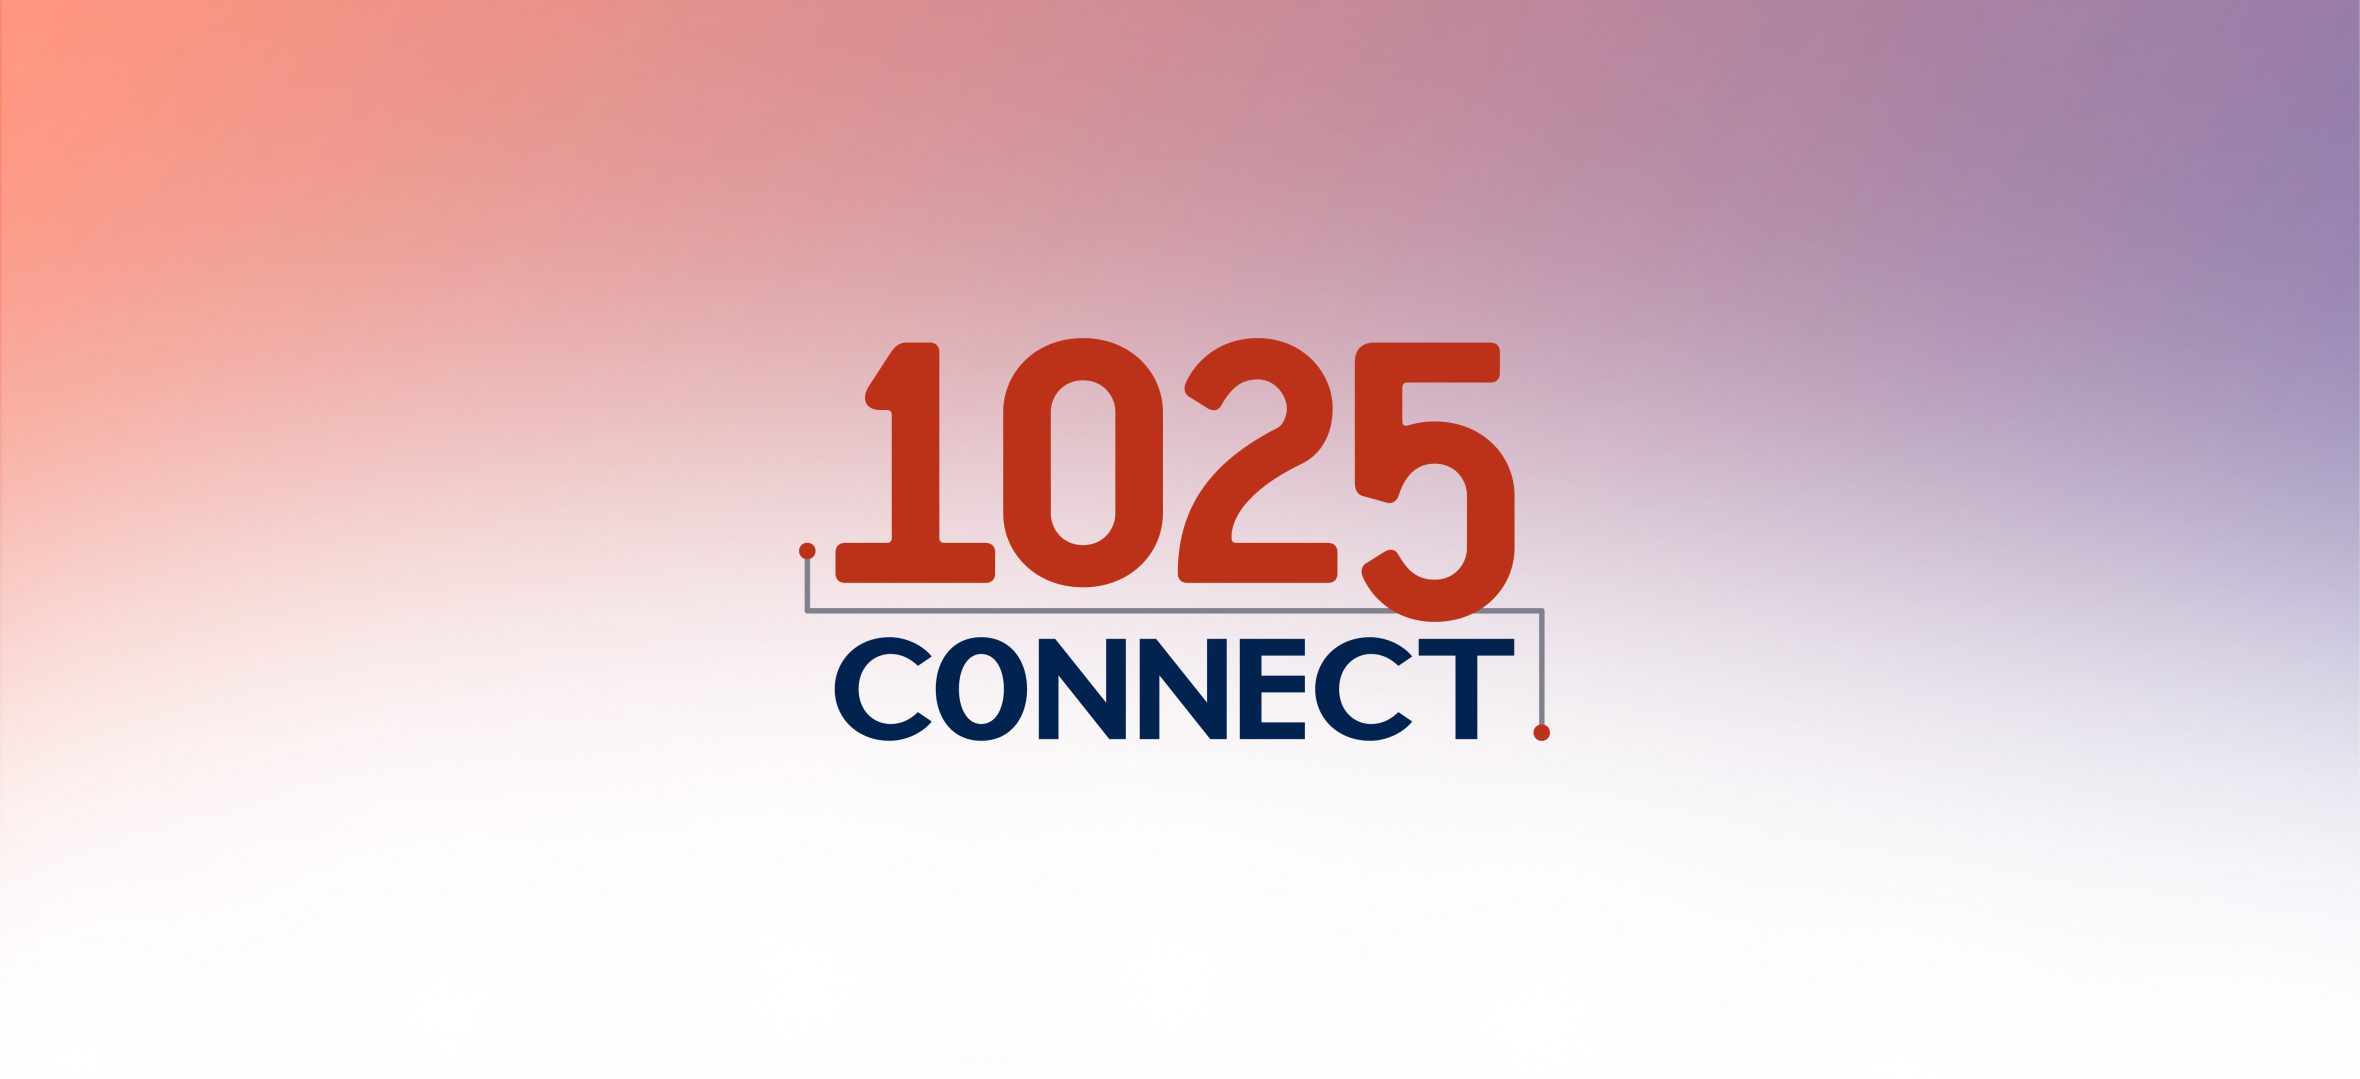 Epsilon Selects 1025Connect to Extend Its Platform for Direct Access to Cloud Connectivity on Long Island